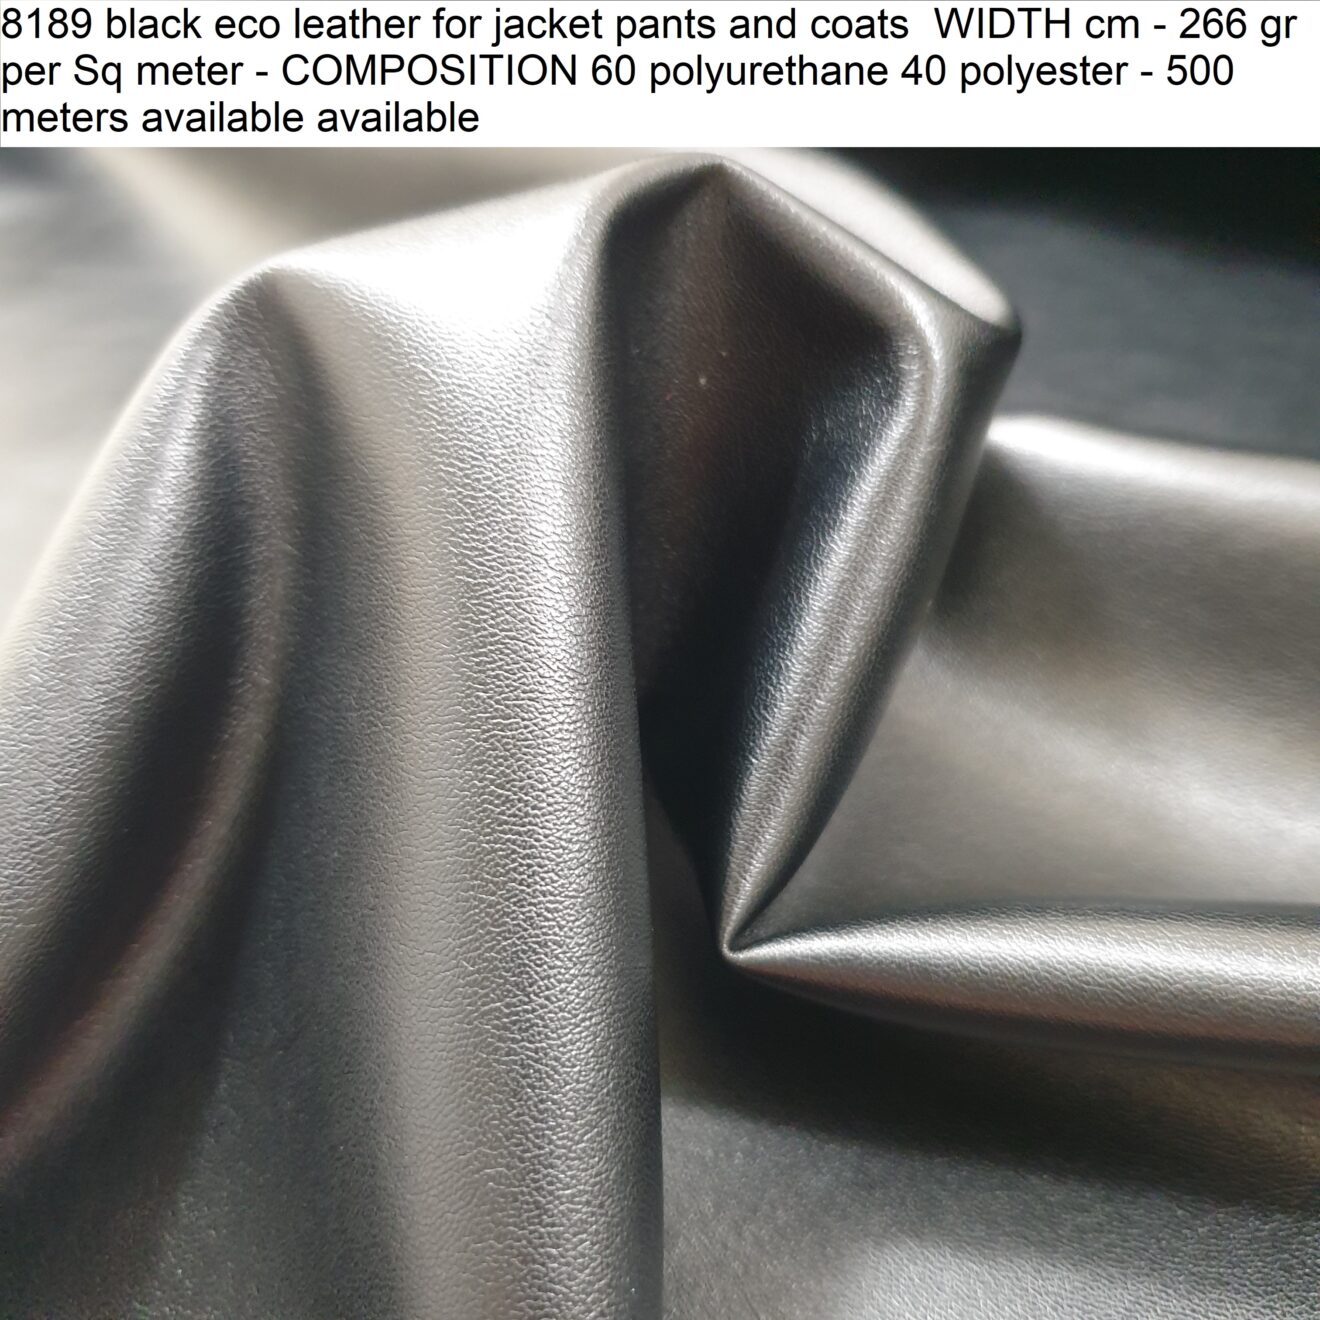 8189 black eco leather for jacket pants and coats WIDTH cm - 266 gr per Sq meter - COMPOSITION 60 polyurethane 40 polyester - 500 meters available available